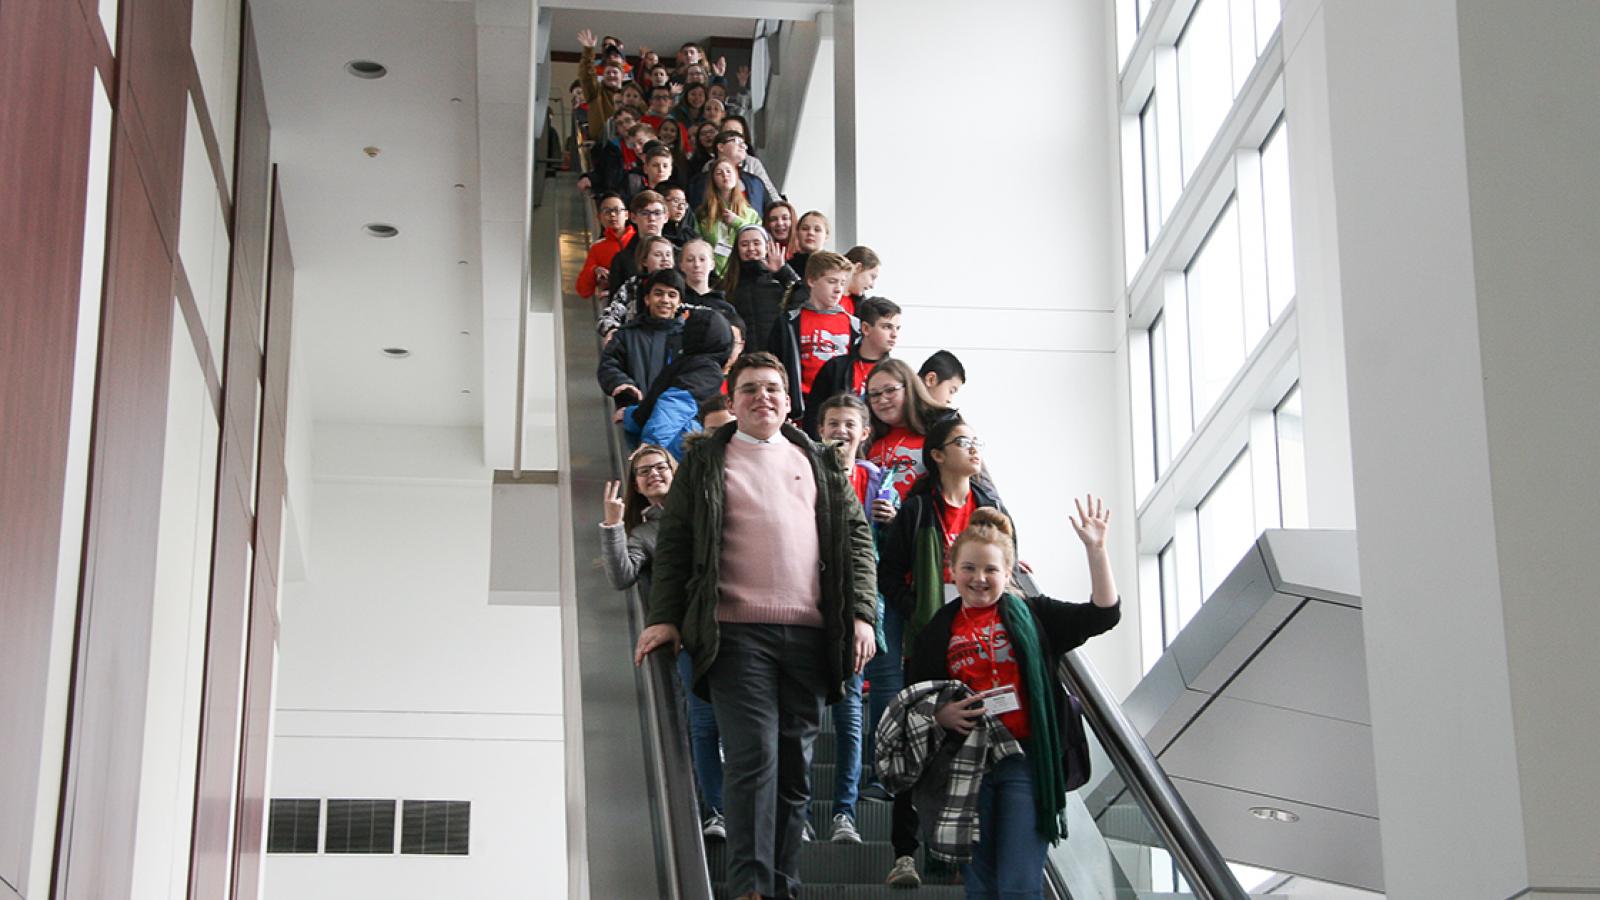 Middle School Honor Band group visits The Schott